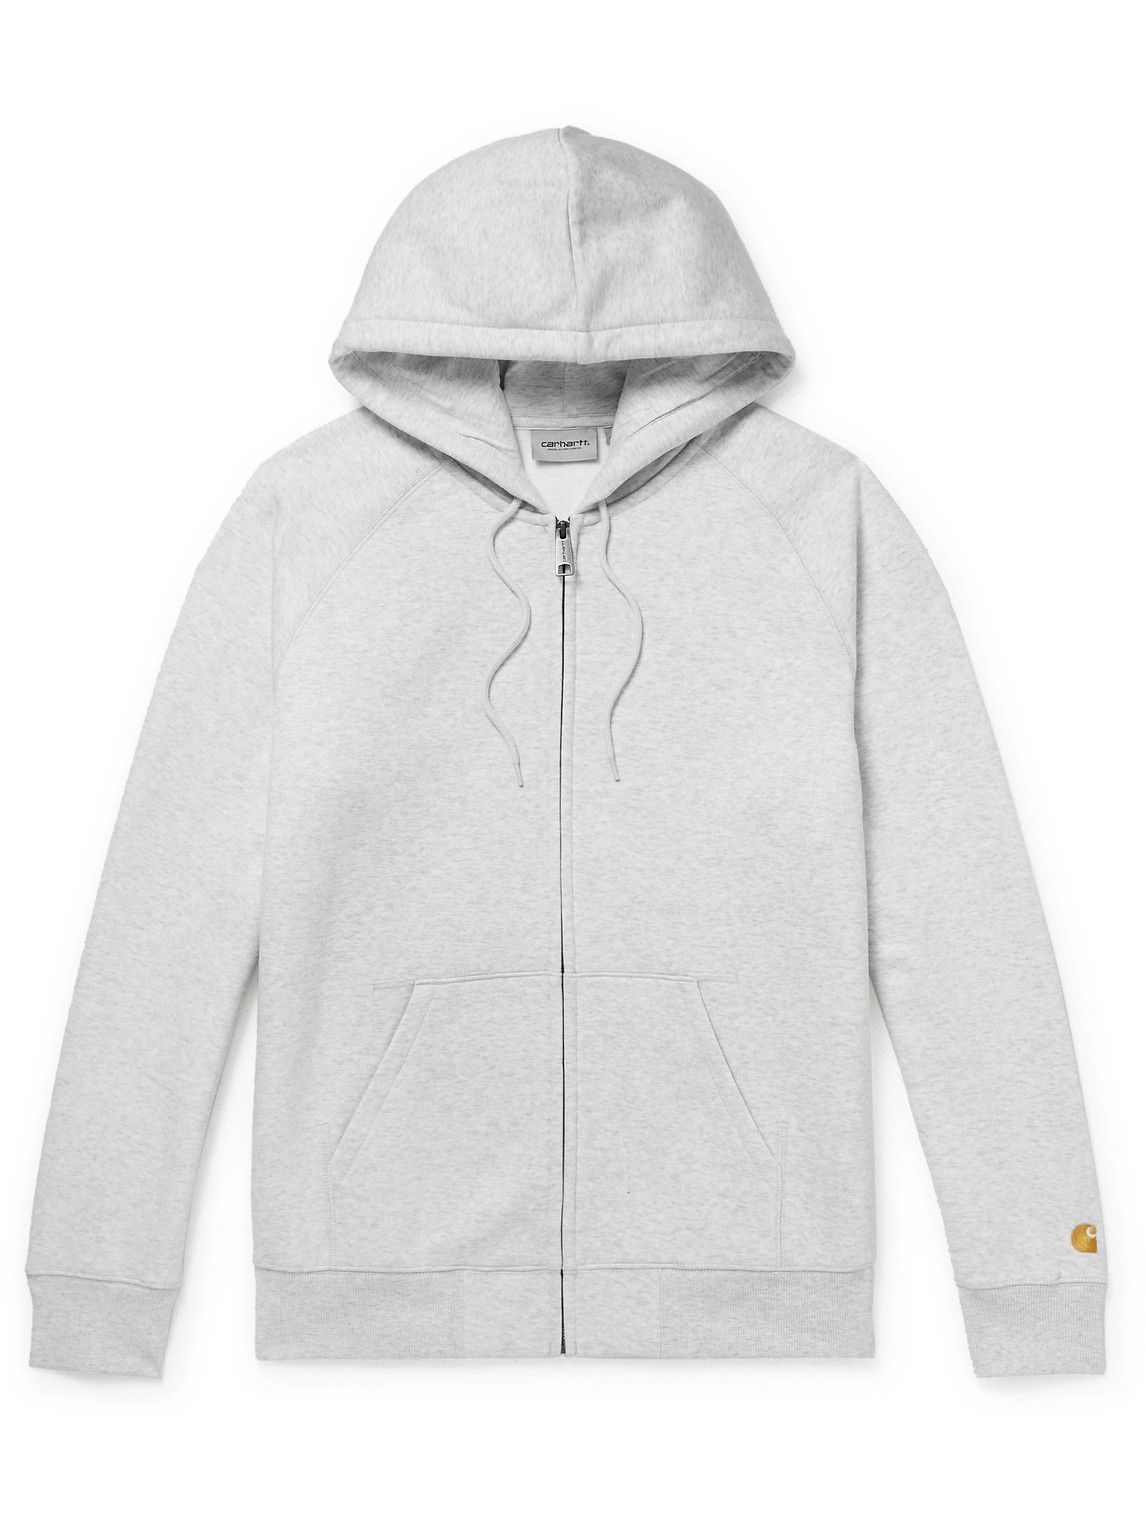 Carhartt WIP - Chase Logo-Embroidered Cotton-Blend Jersey Zip-Up Hoodie ...